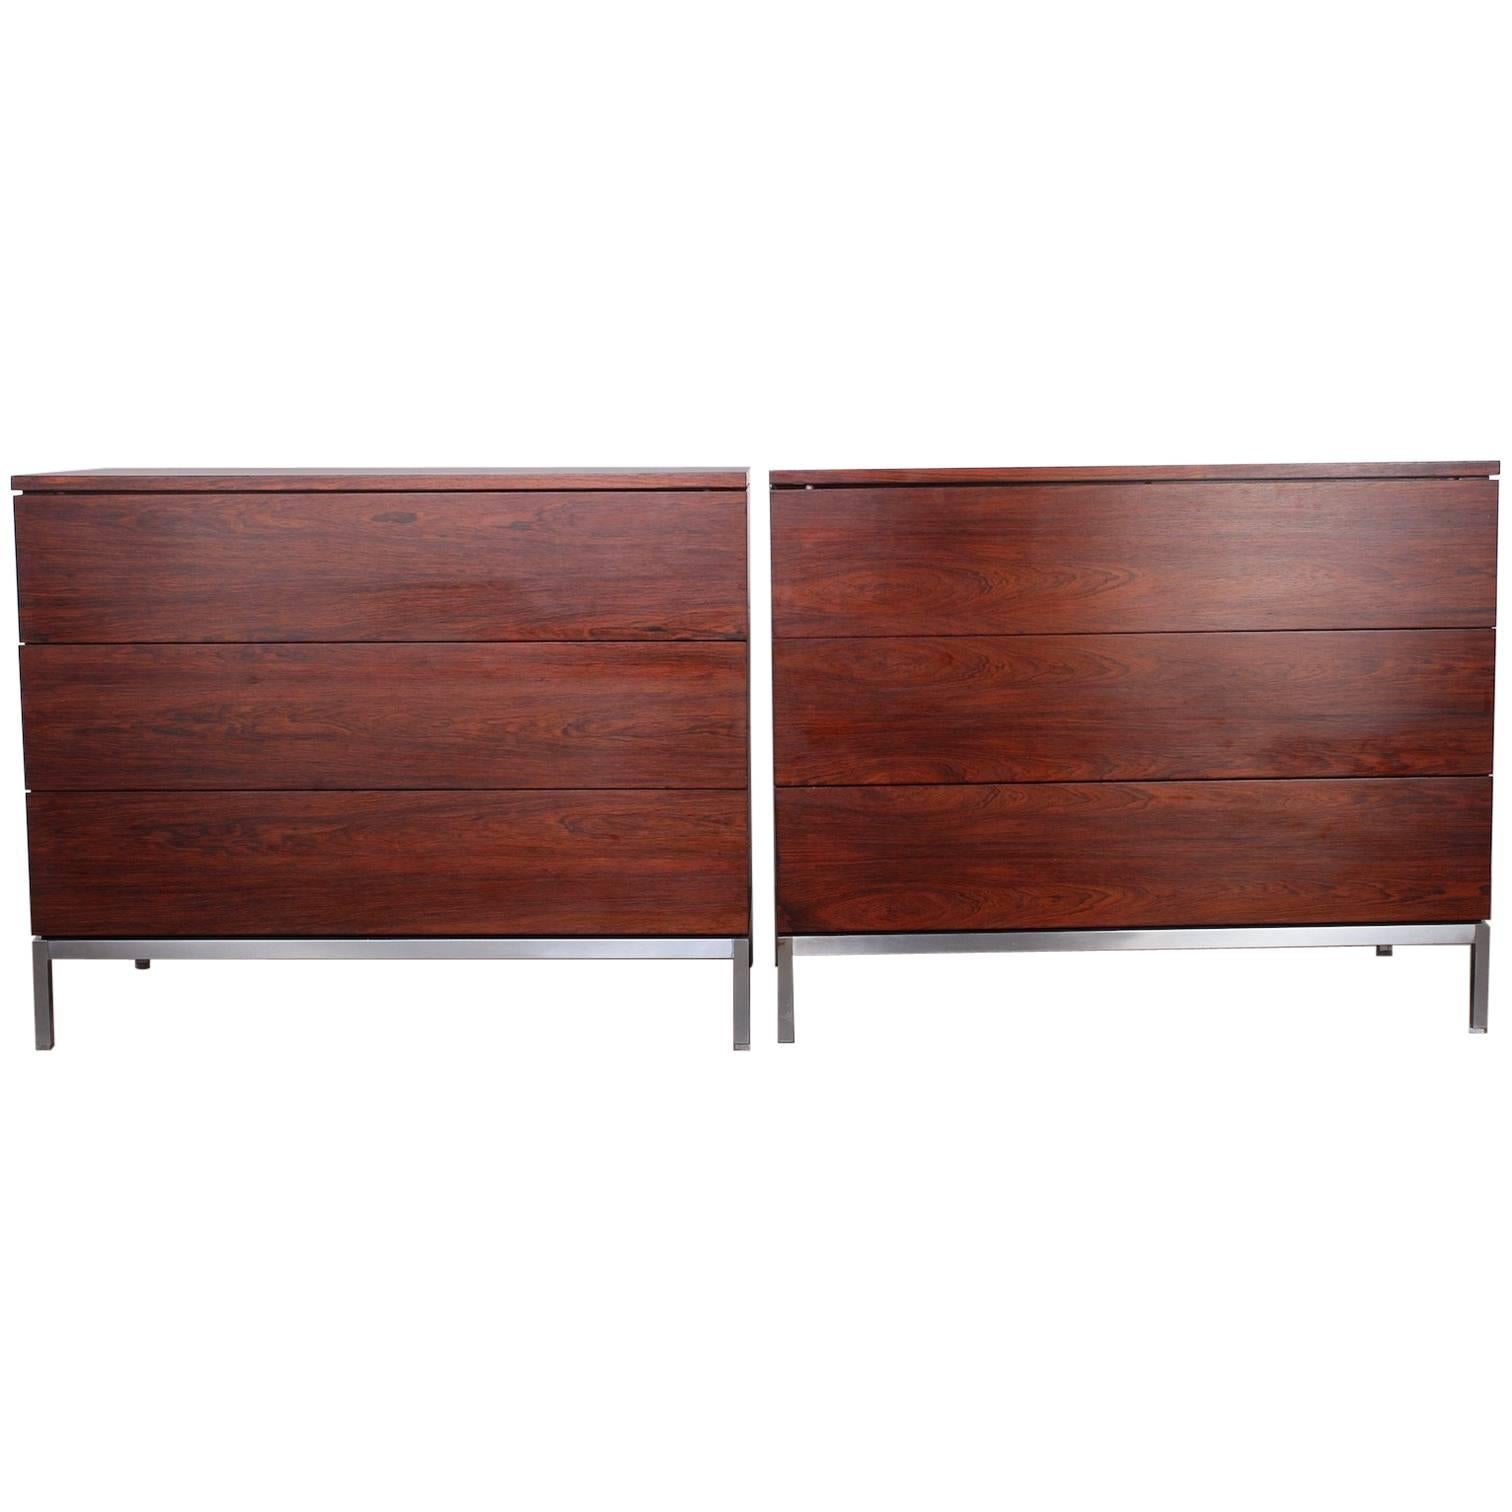 Pair of Rosewood Chests by Florence Knoll